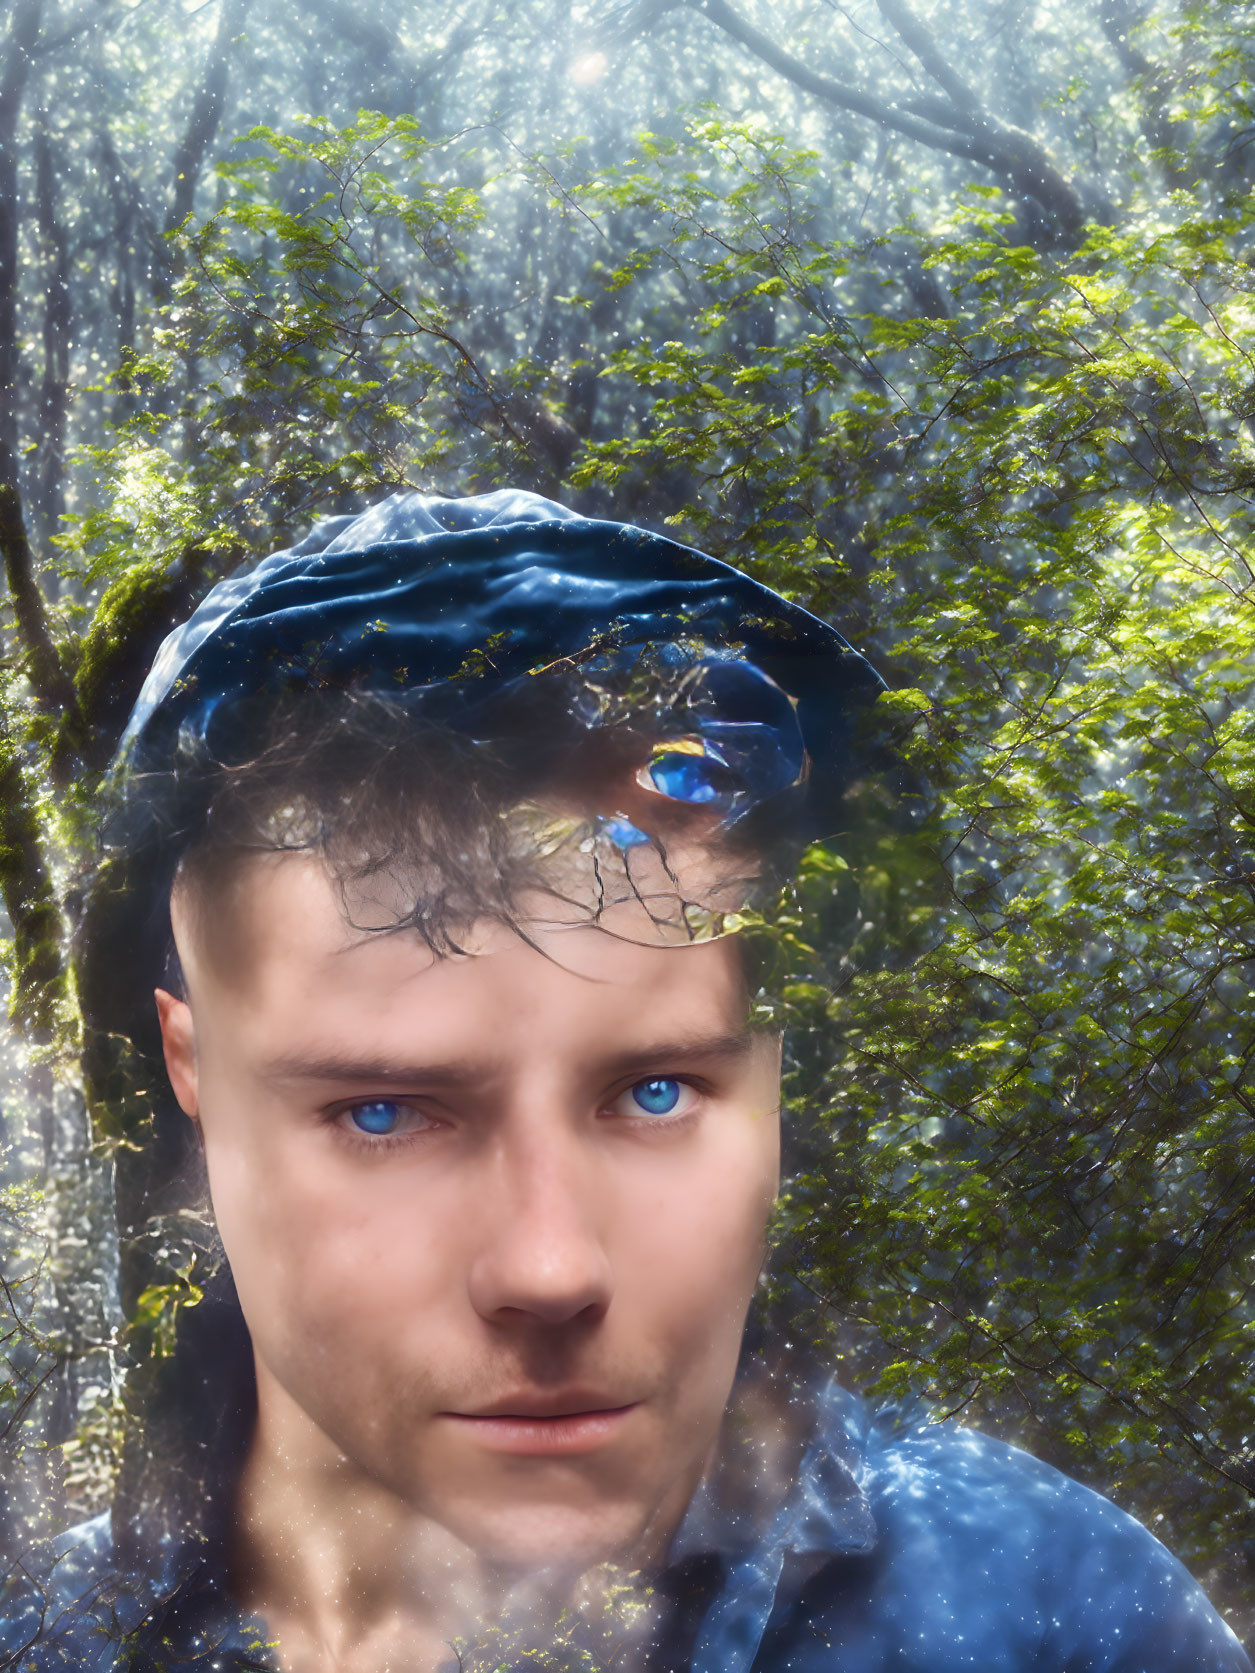 Blue-eyed person in black cap against foggy green forest.